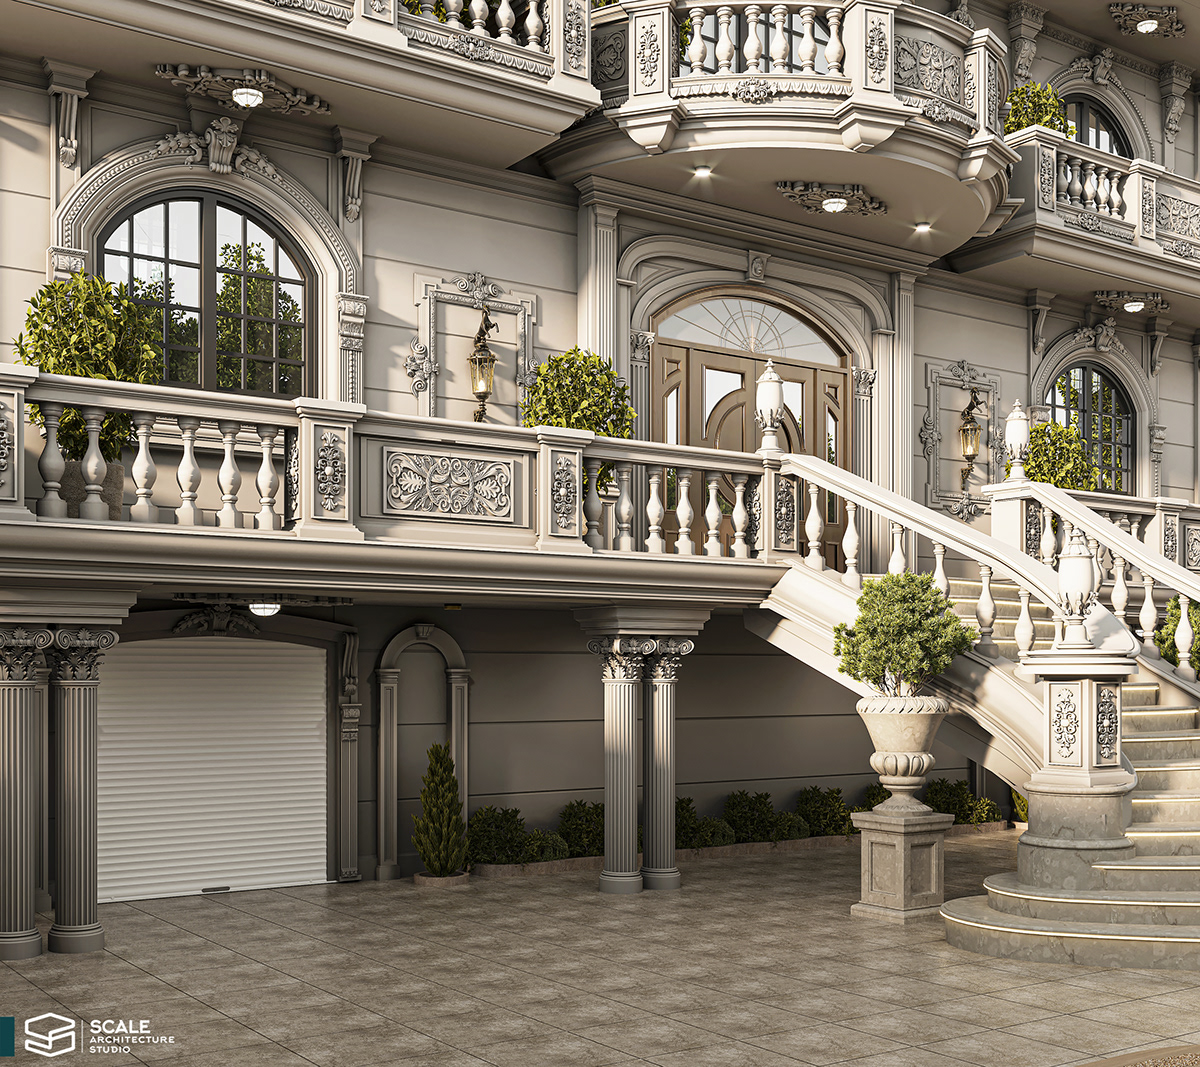 exterior Classic Elevation architecture Render visualization 3D 3ds max vray